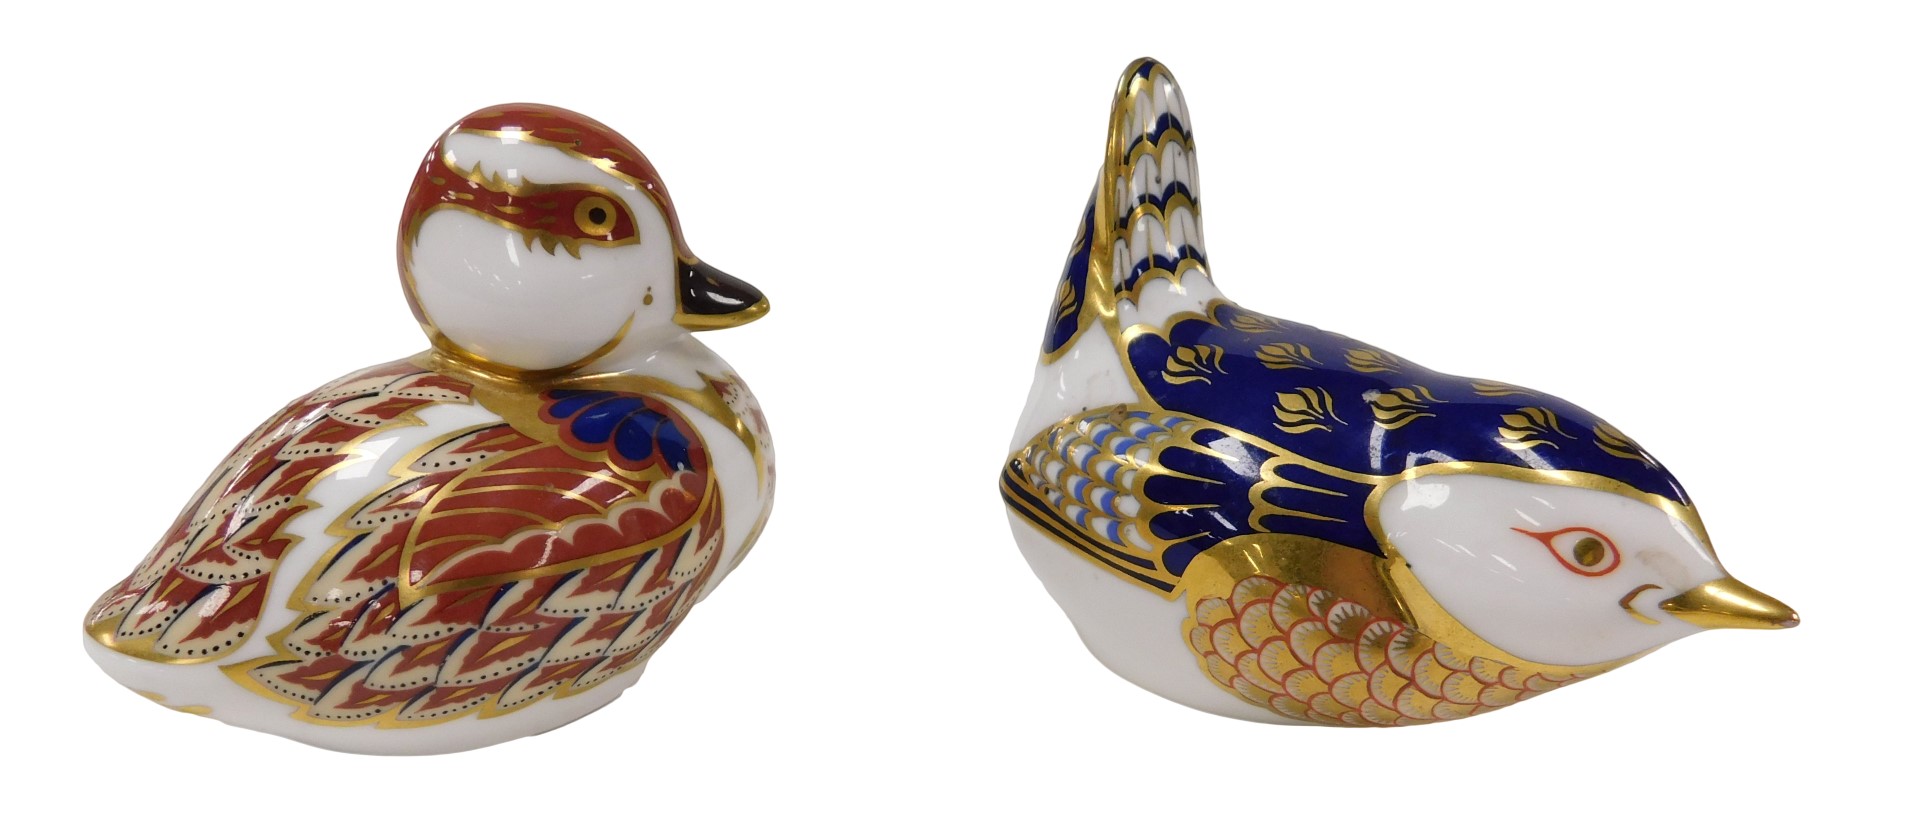 A Royal Crown Derby Imari paperweight, modelled as a swimming duckling, gold button and another mode